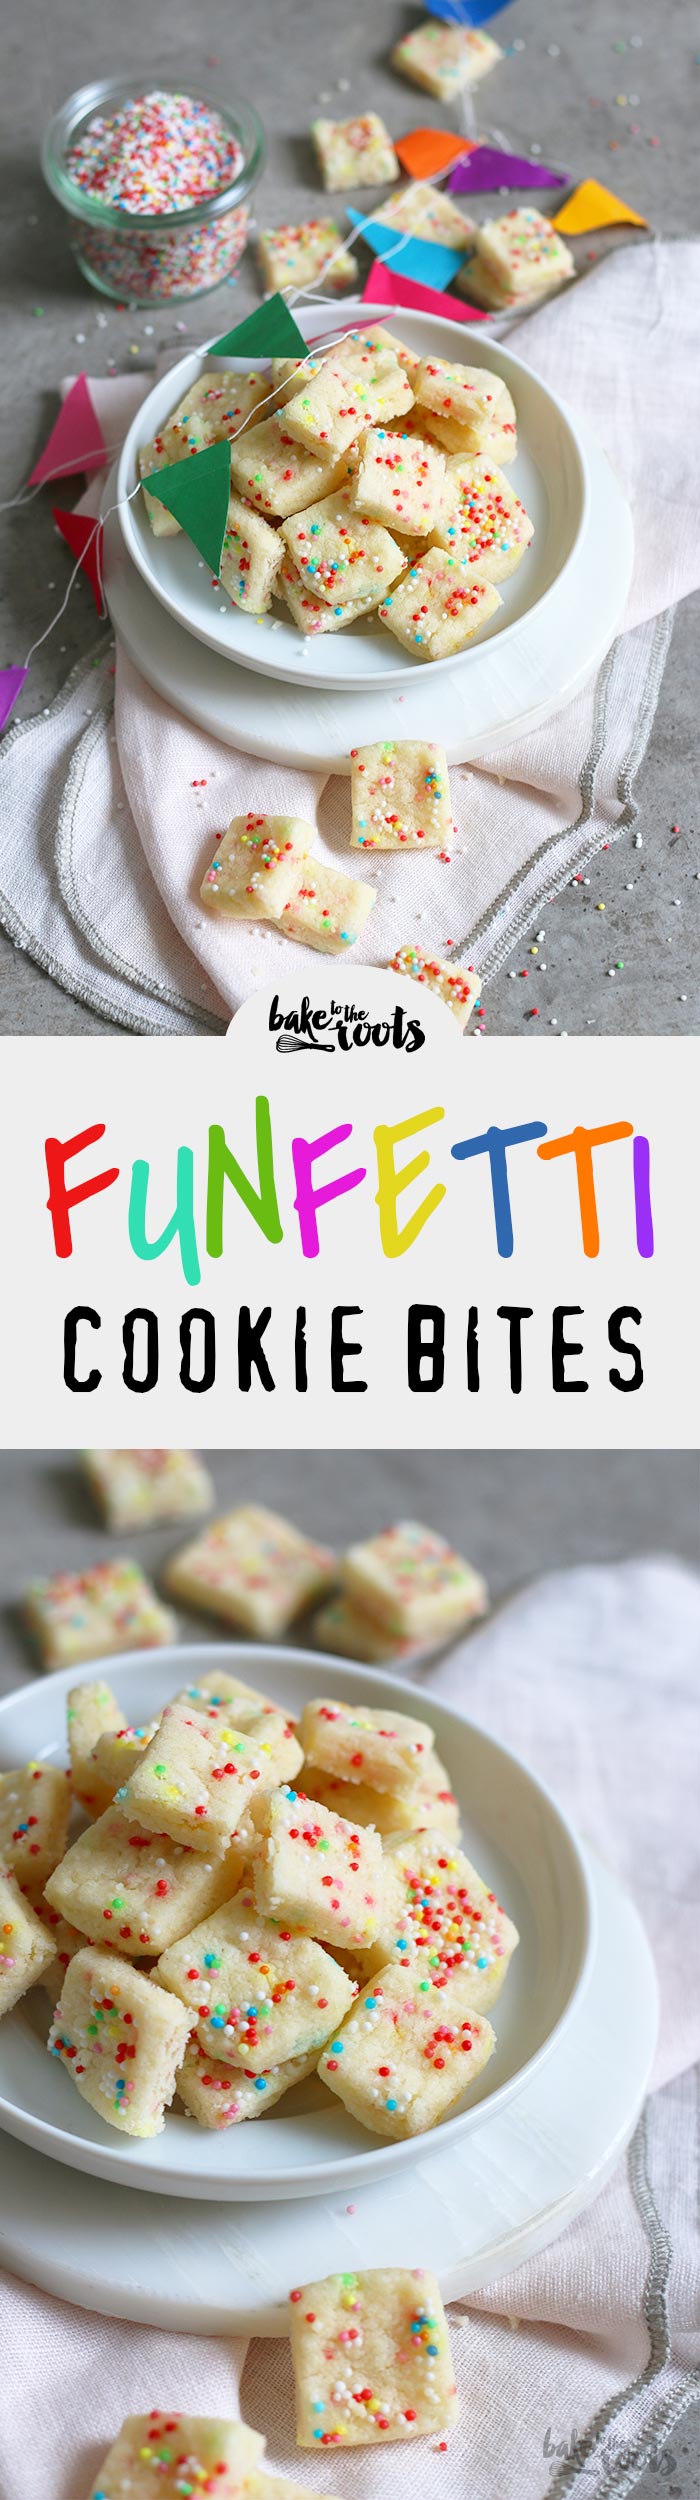 Delicious little cookie bites with colorful rainbow sprinkles. Small kids, as well as big ones, will love them for sure | Bake to the roots